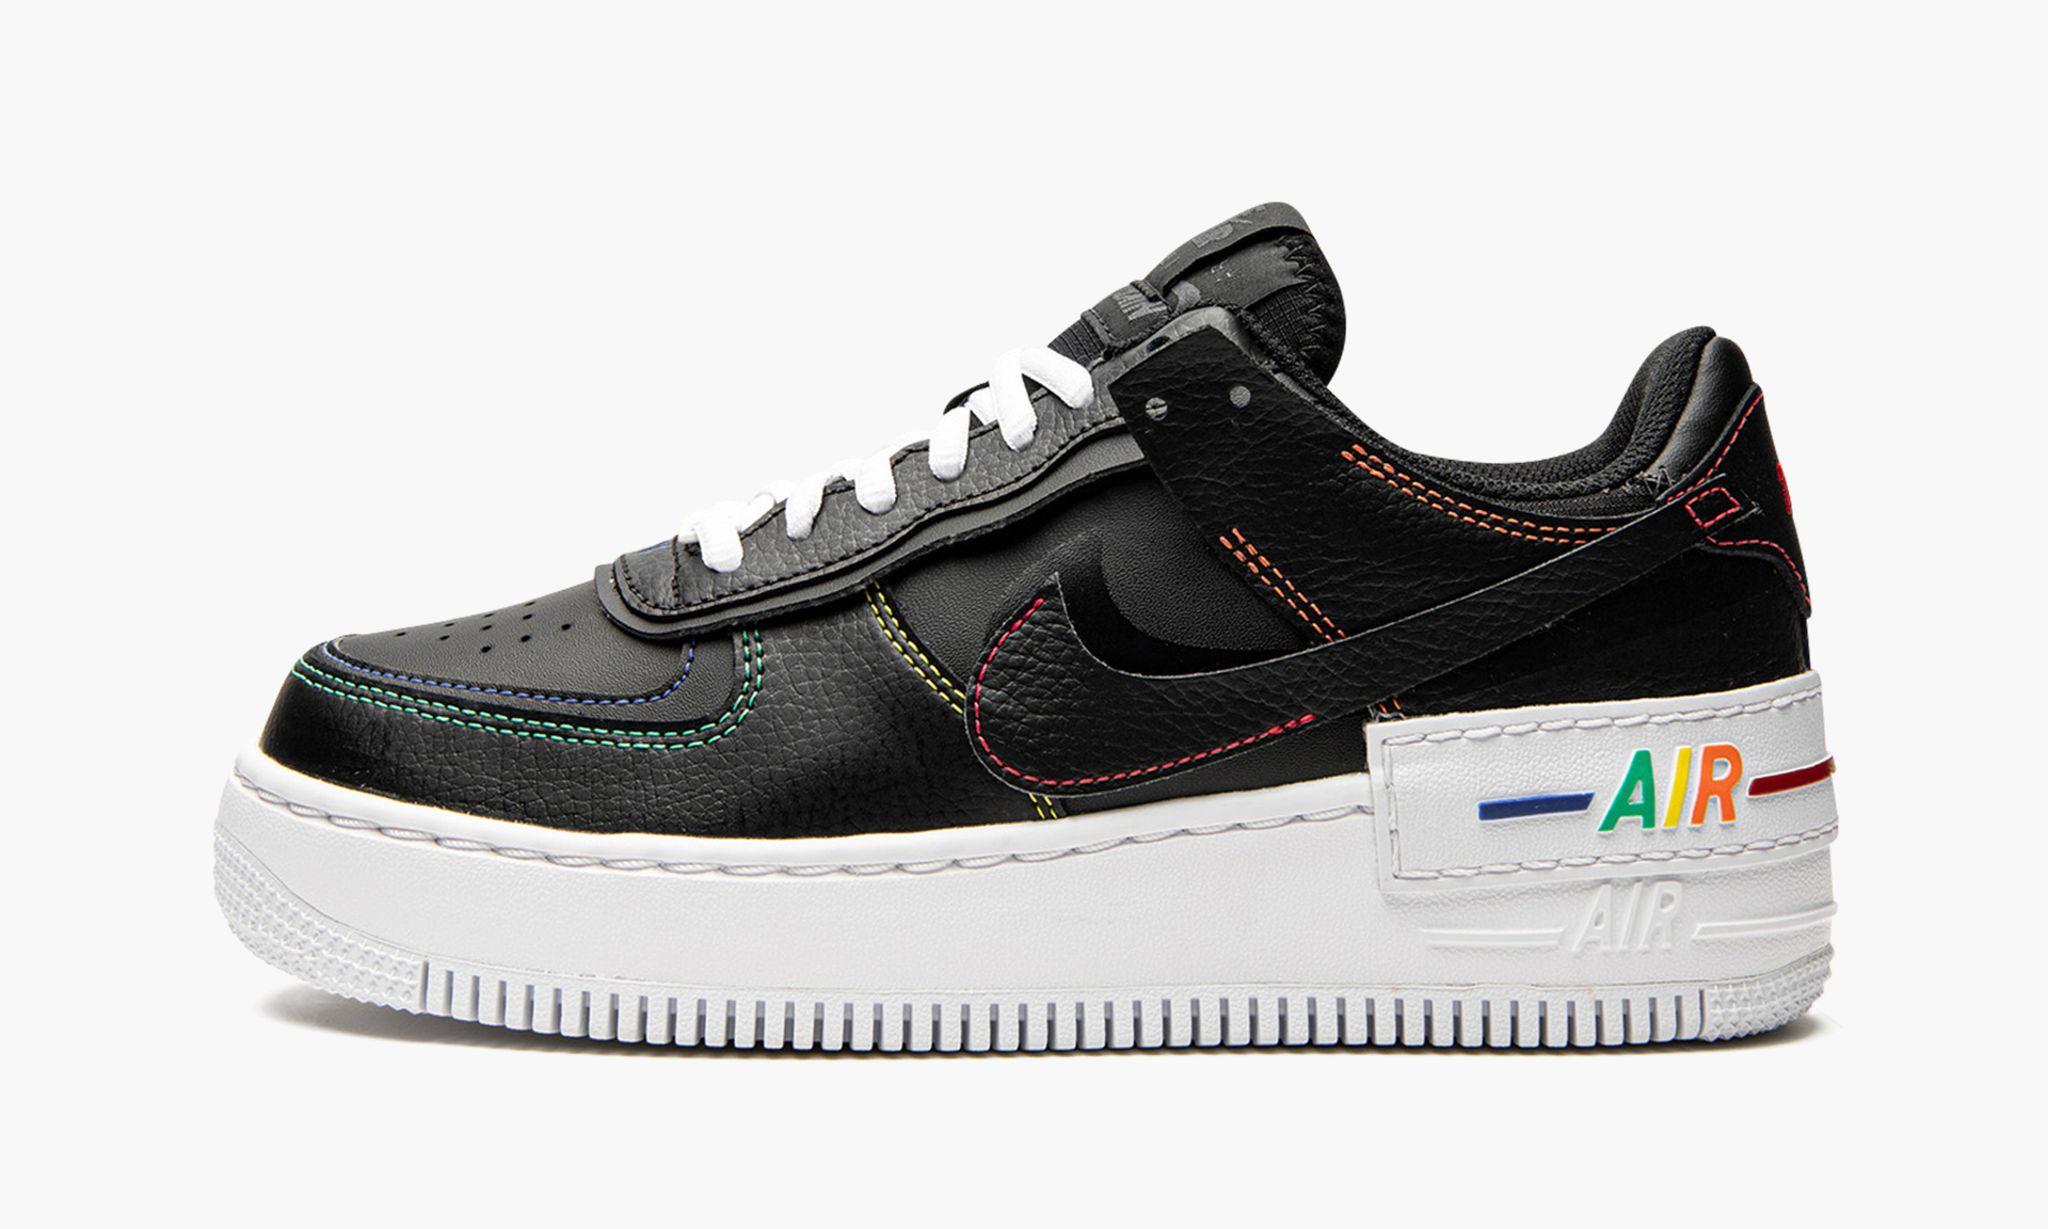 Nike Air Force 1 Shadow "black / Multicolor Stitch" Shoes | Lyst